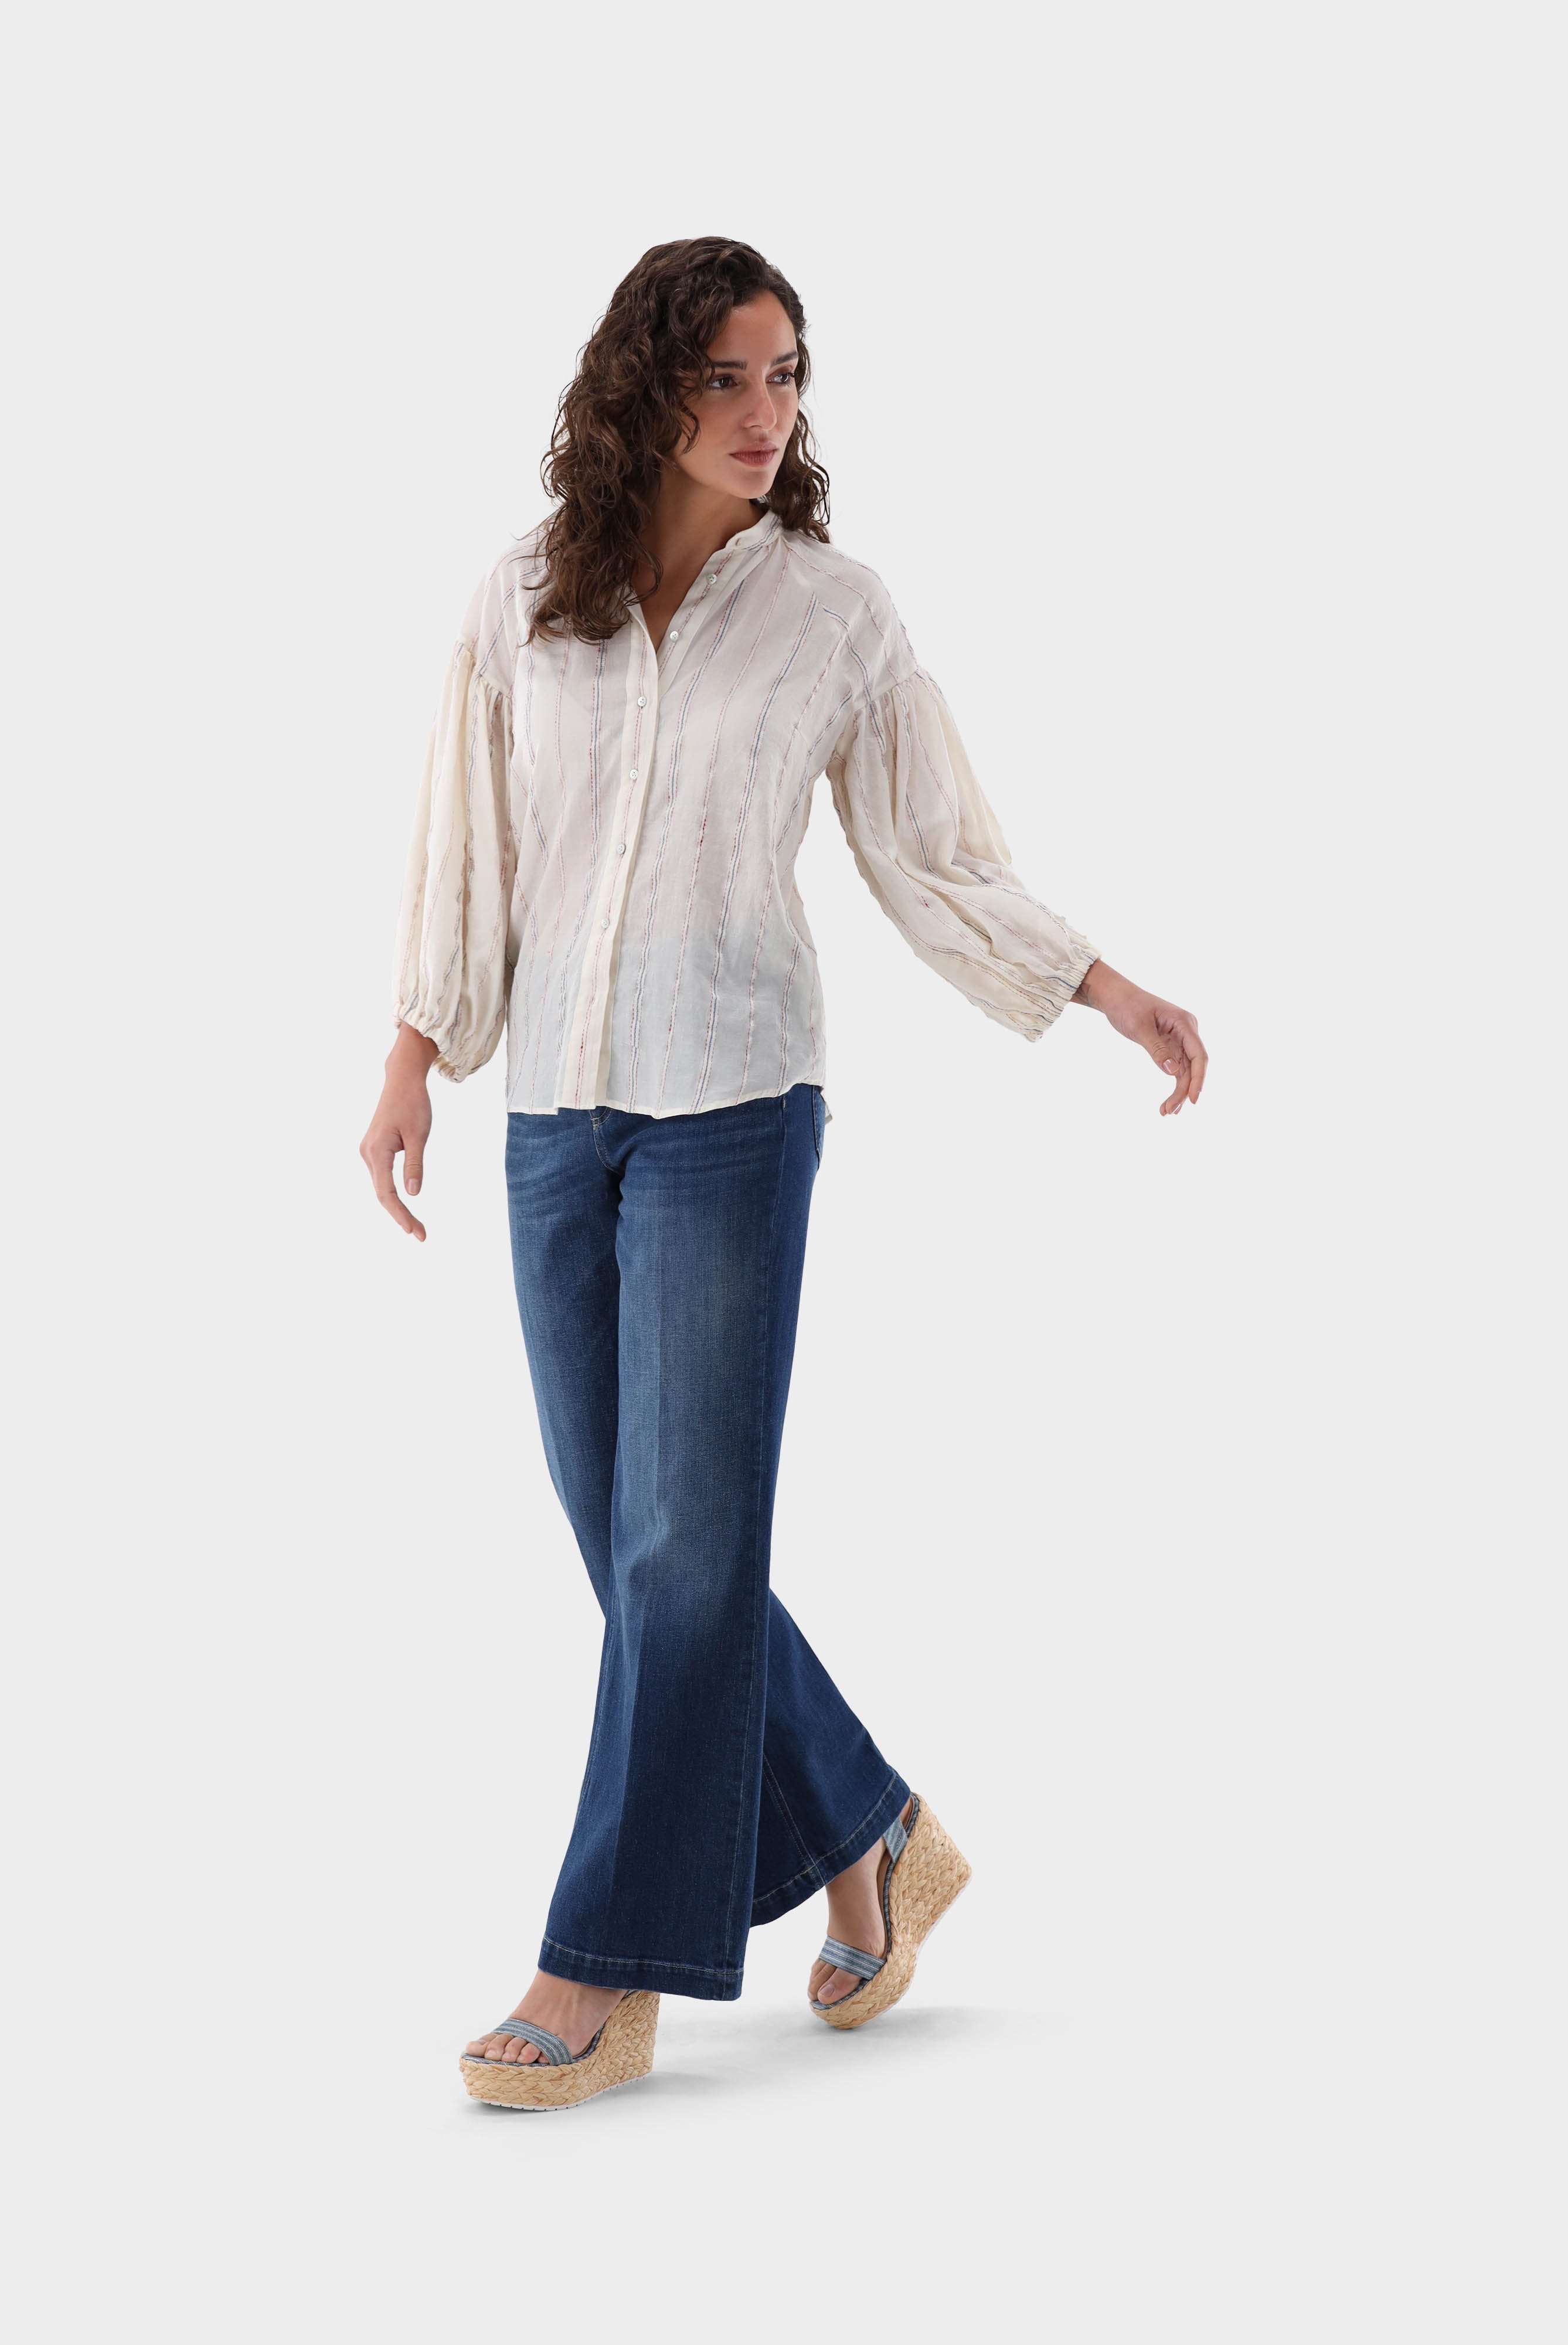 Casual Blouses+Stand-up collar blouse with bluson sleeves+05.528L.07.151673.107.32